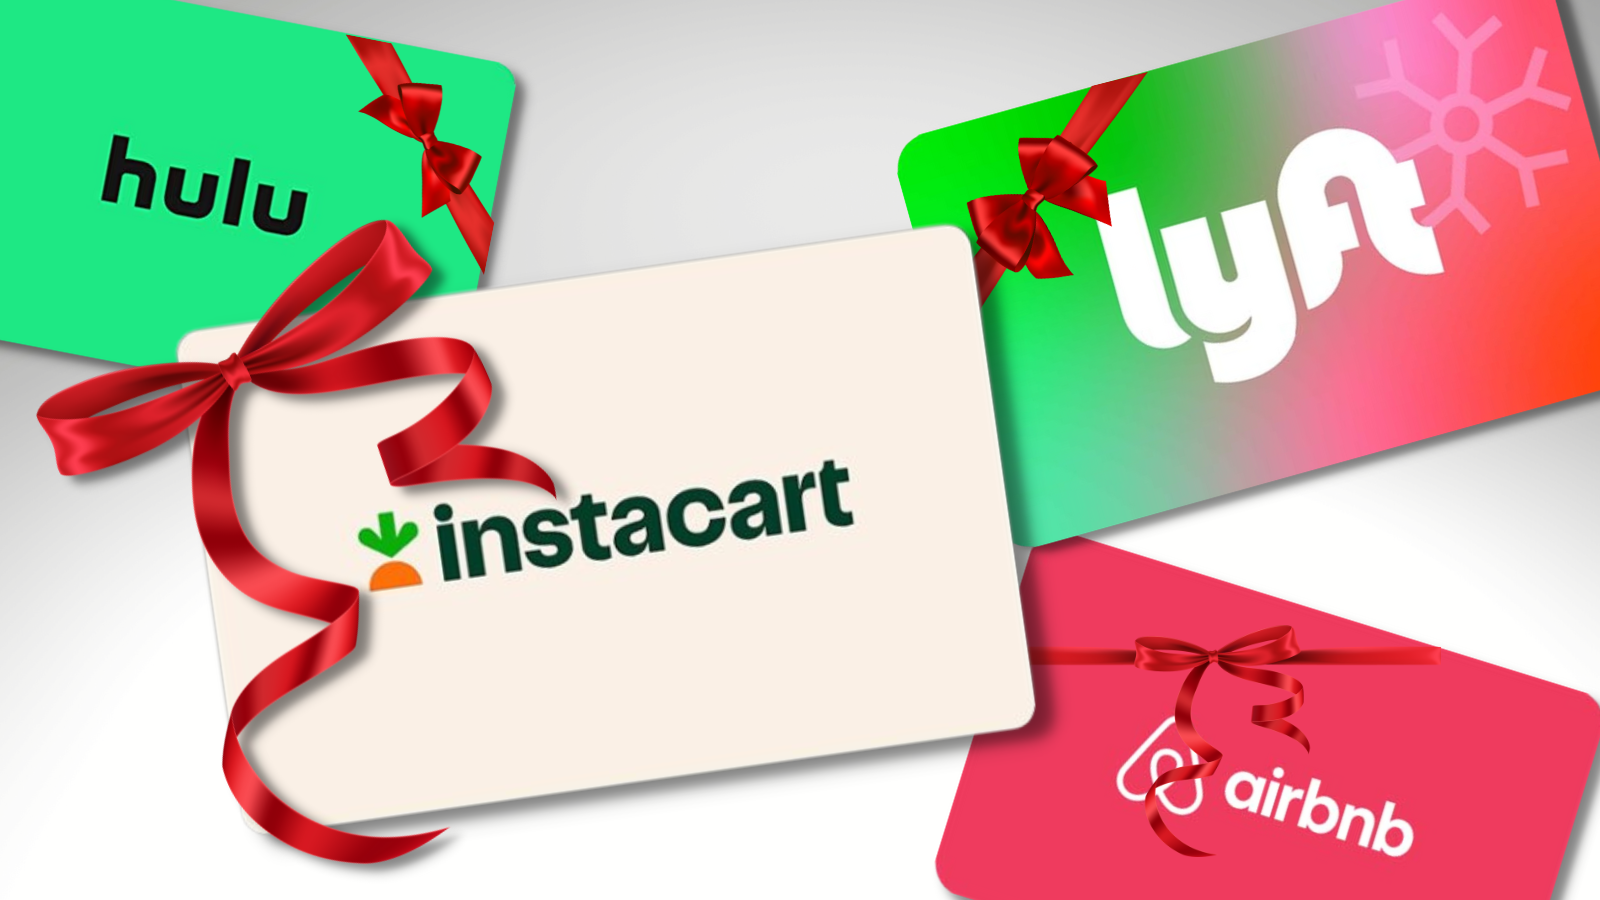 gift cards for Instacart, Hulu, Airbnb, and Lyft with bows